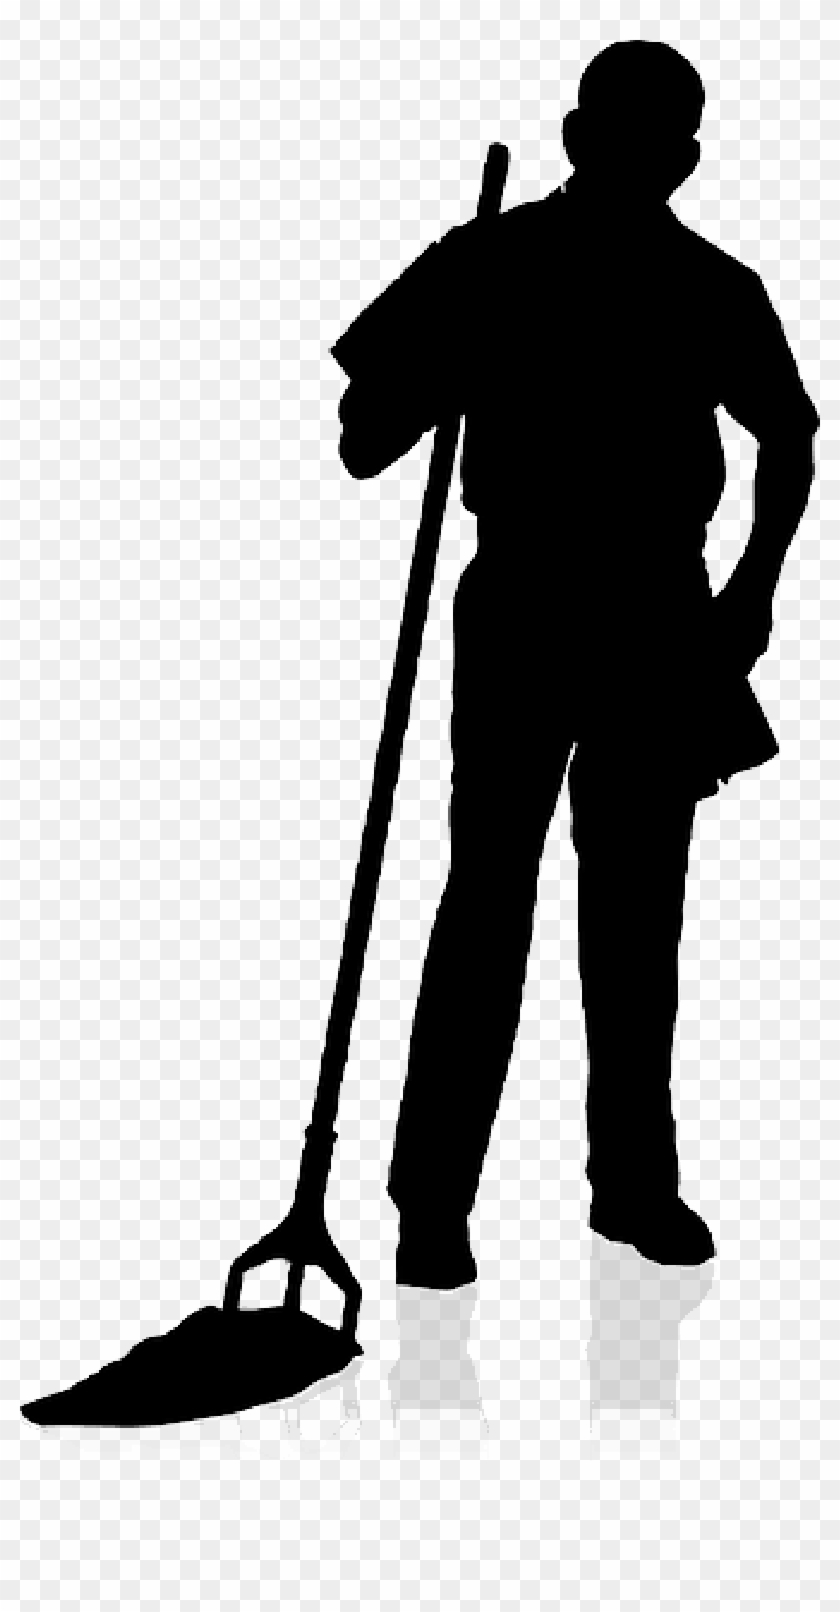 Janitor Silhouette, Cleaner, Mop, Standing, Job, Janitor - Cleaner Silhouette #702568